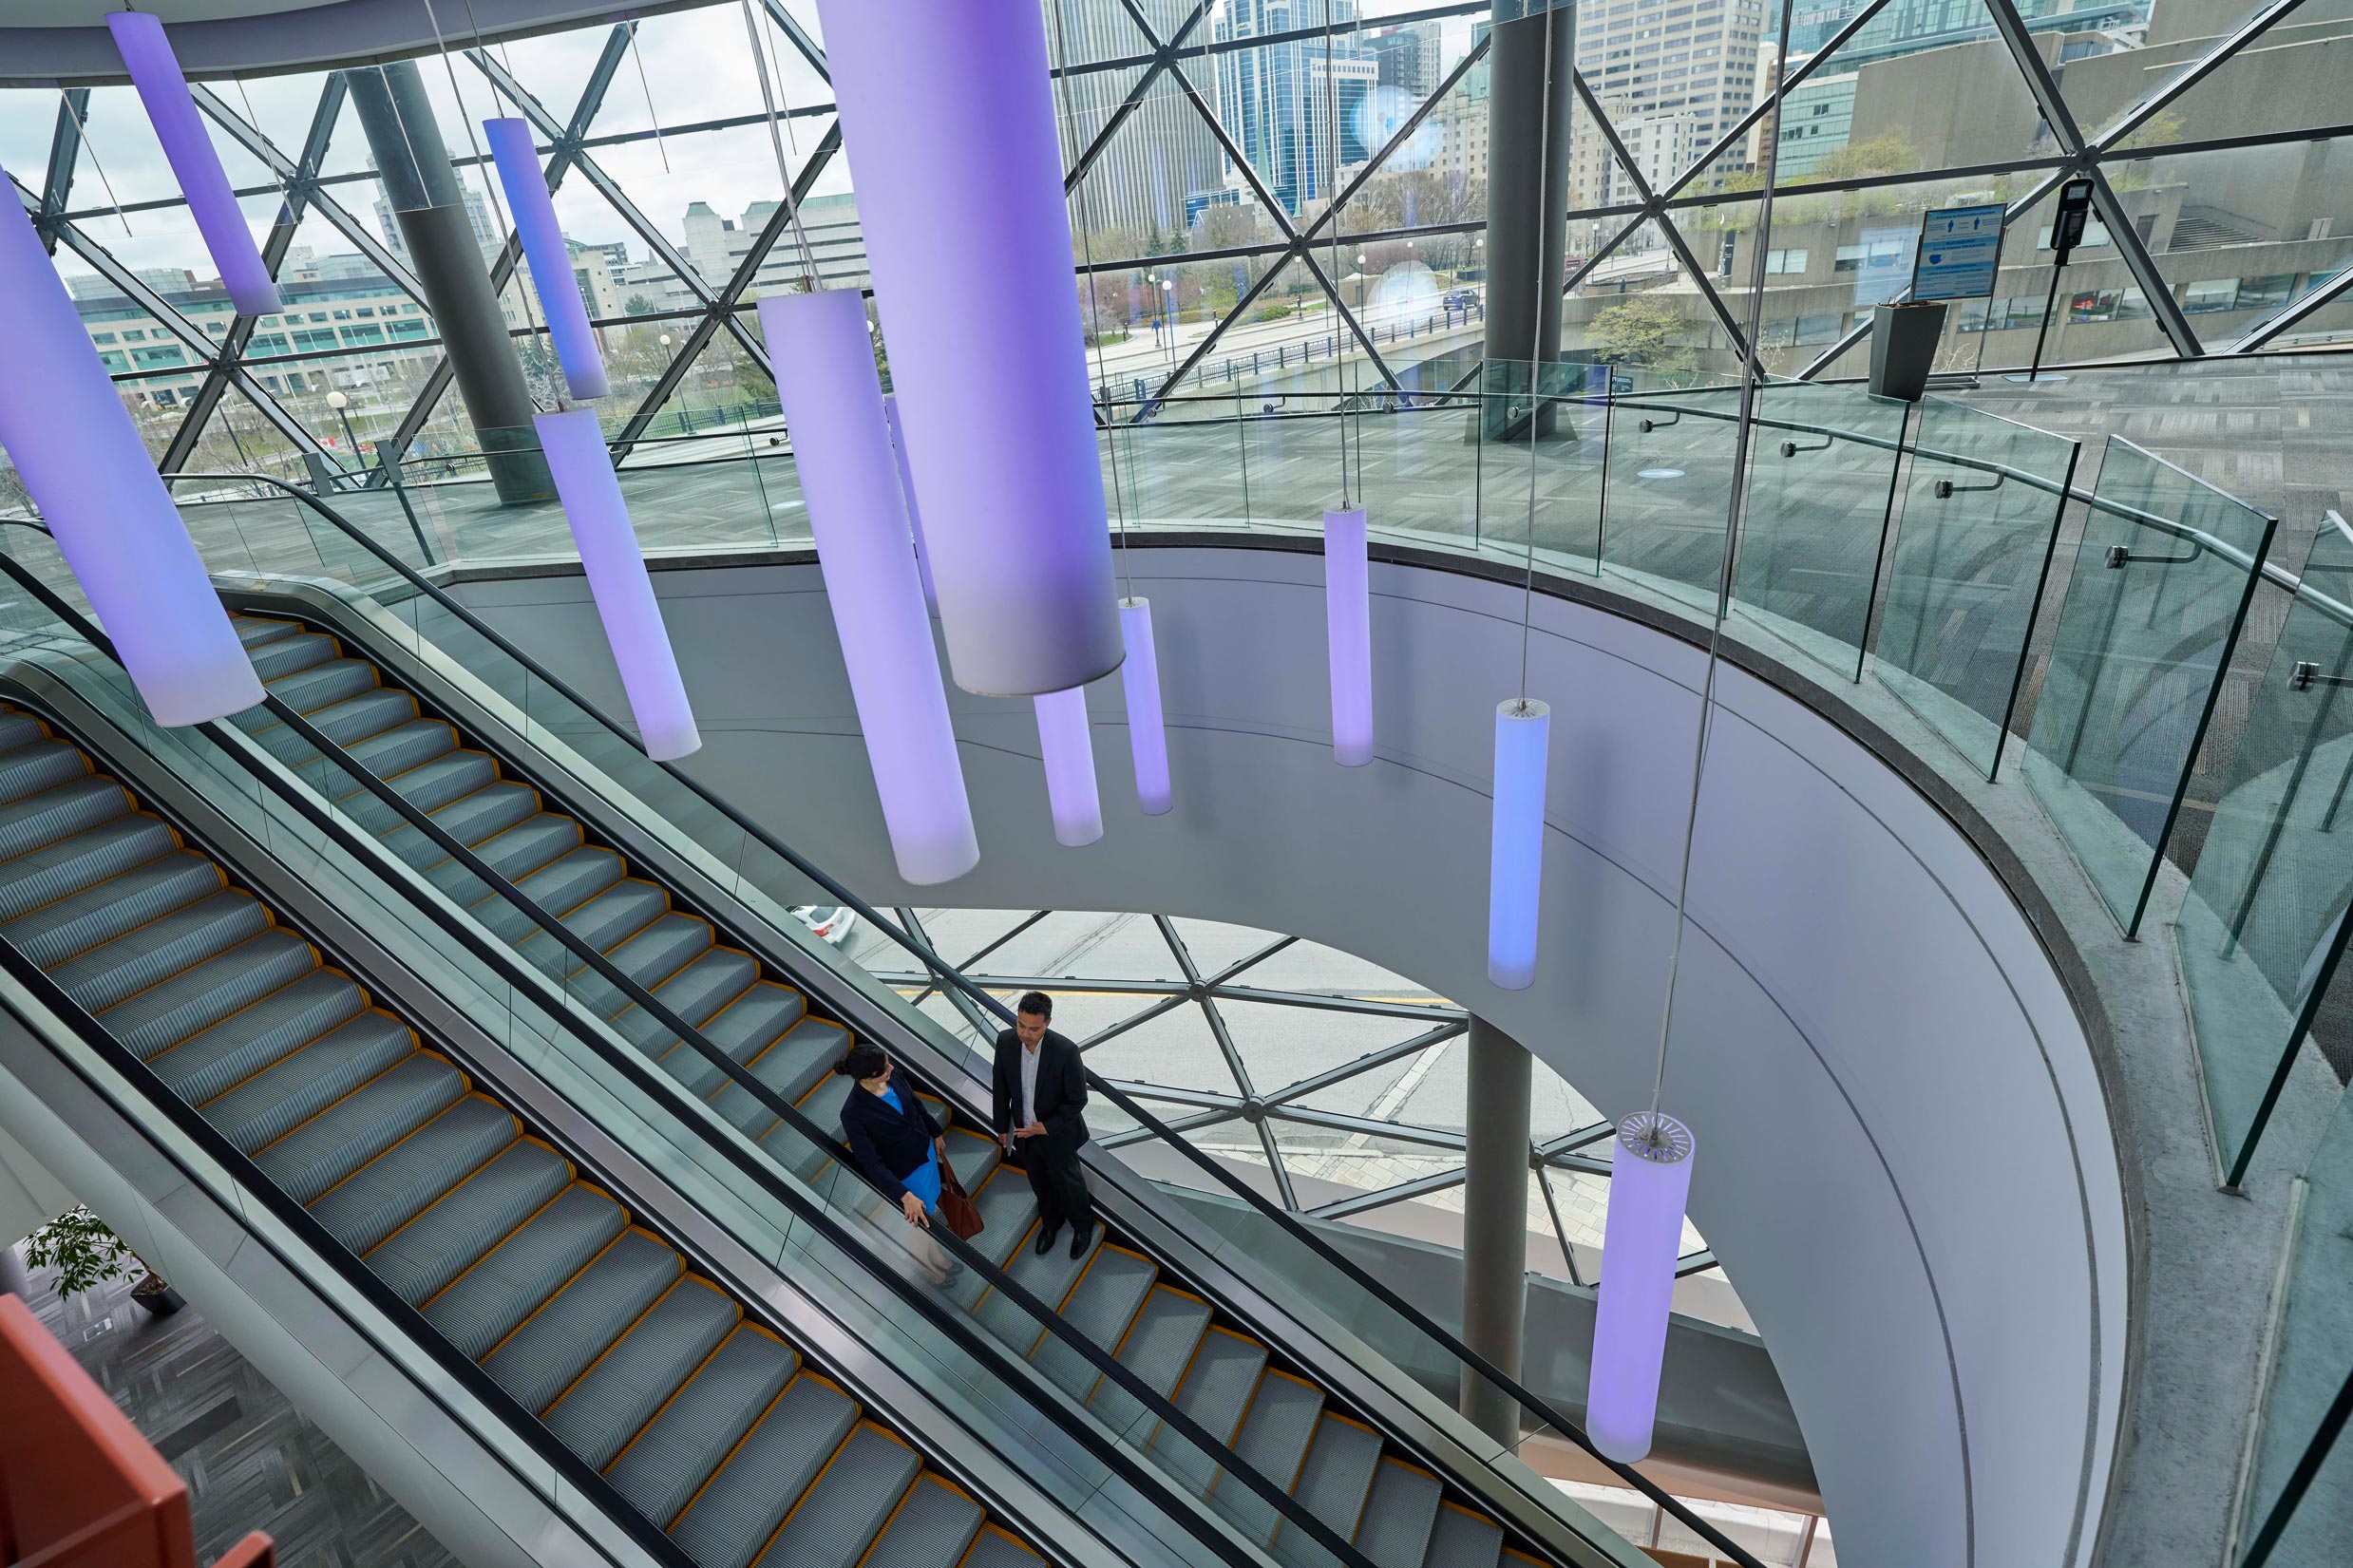 A man and woman stand on the Shaw Centre's escalators.